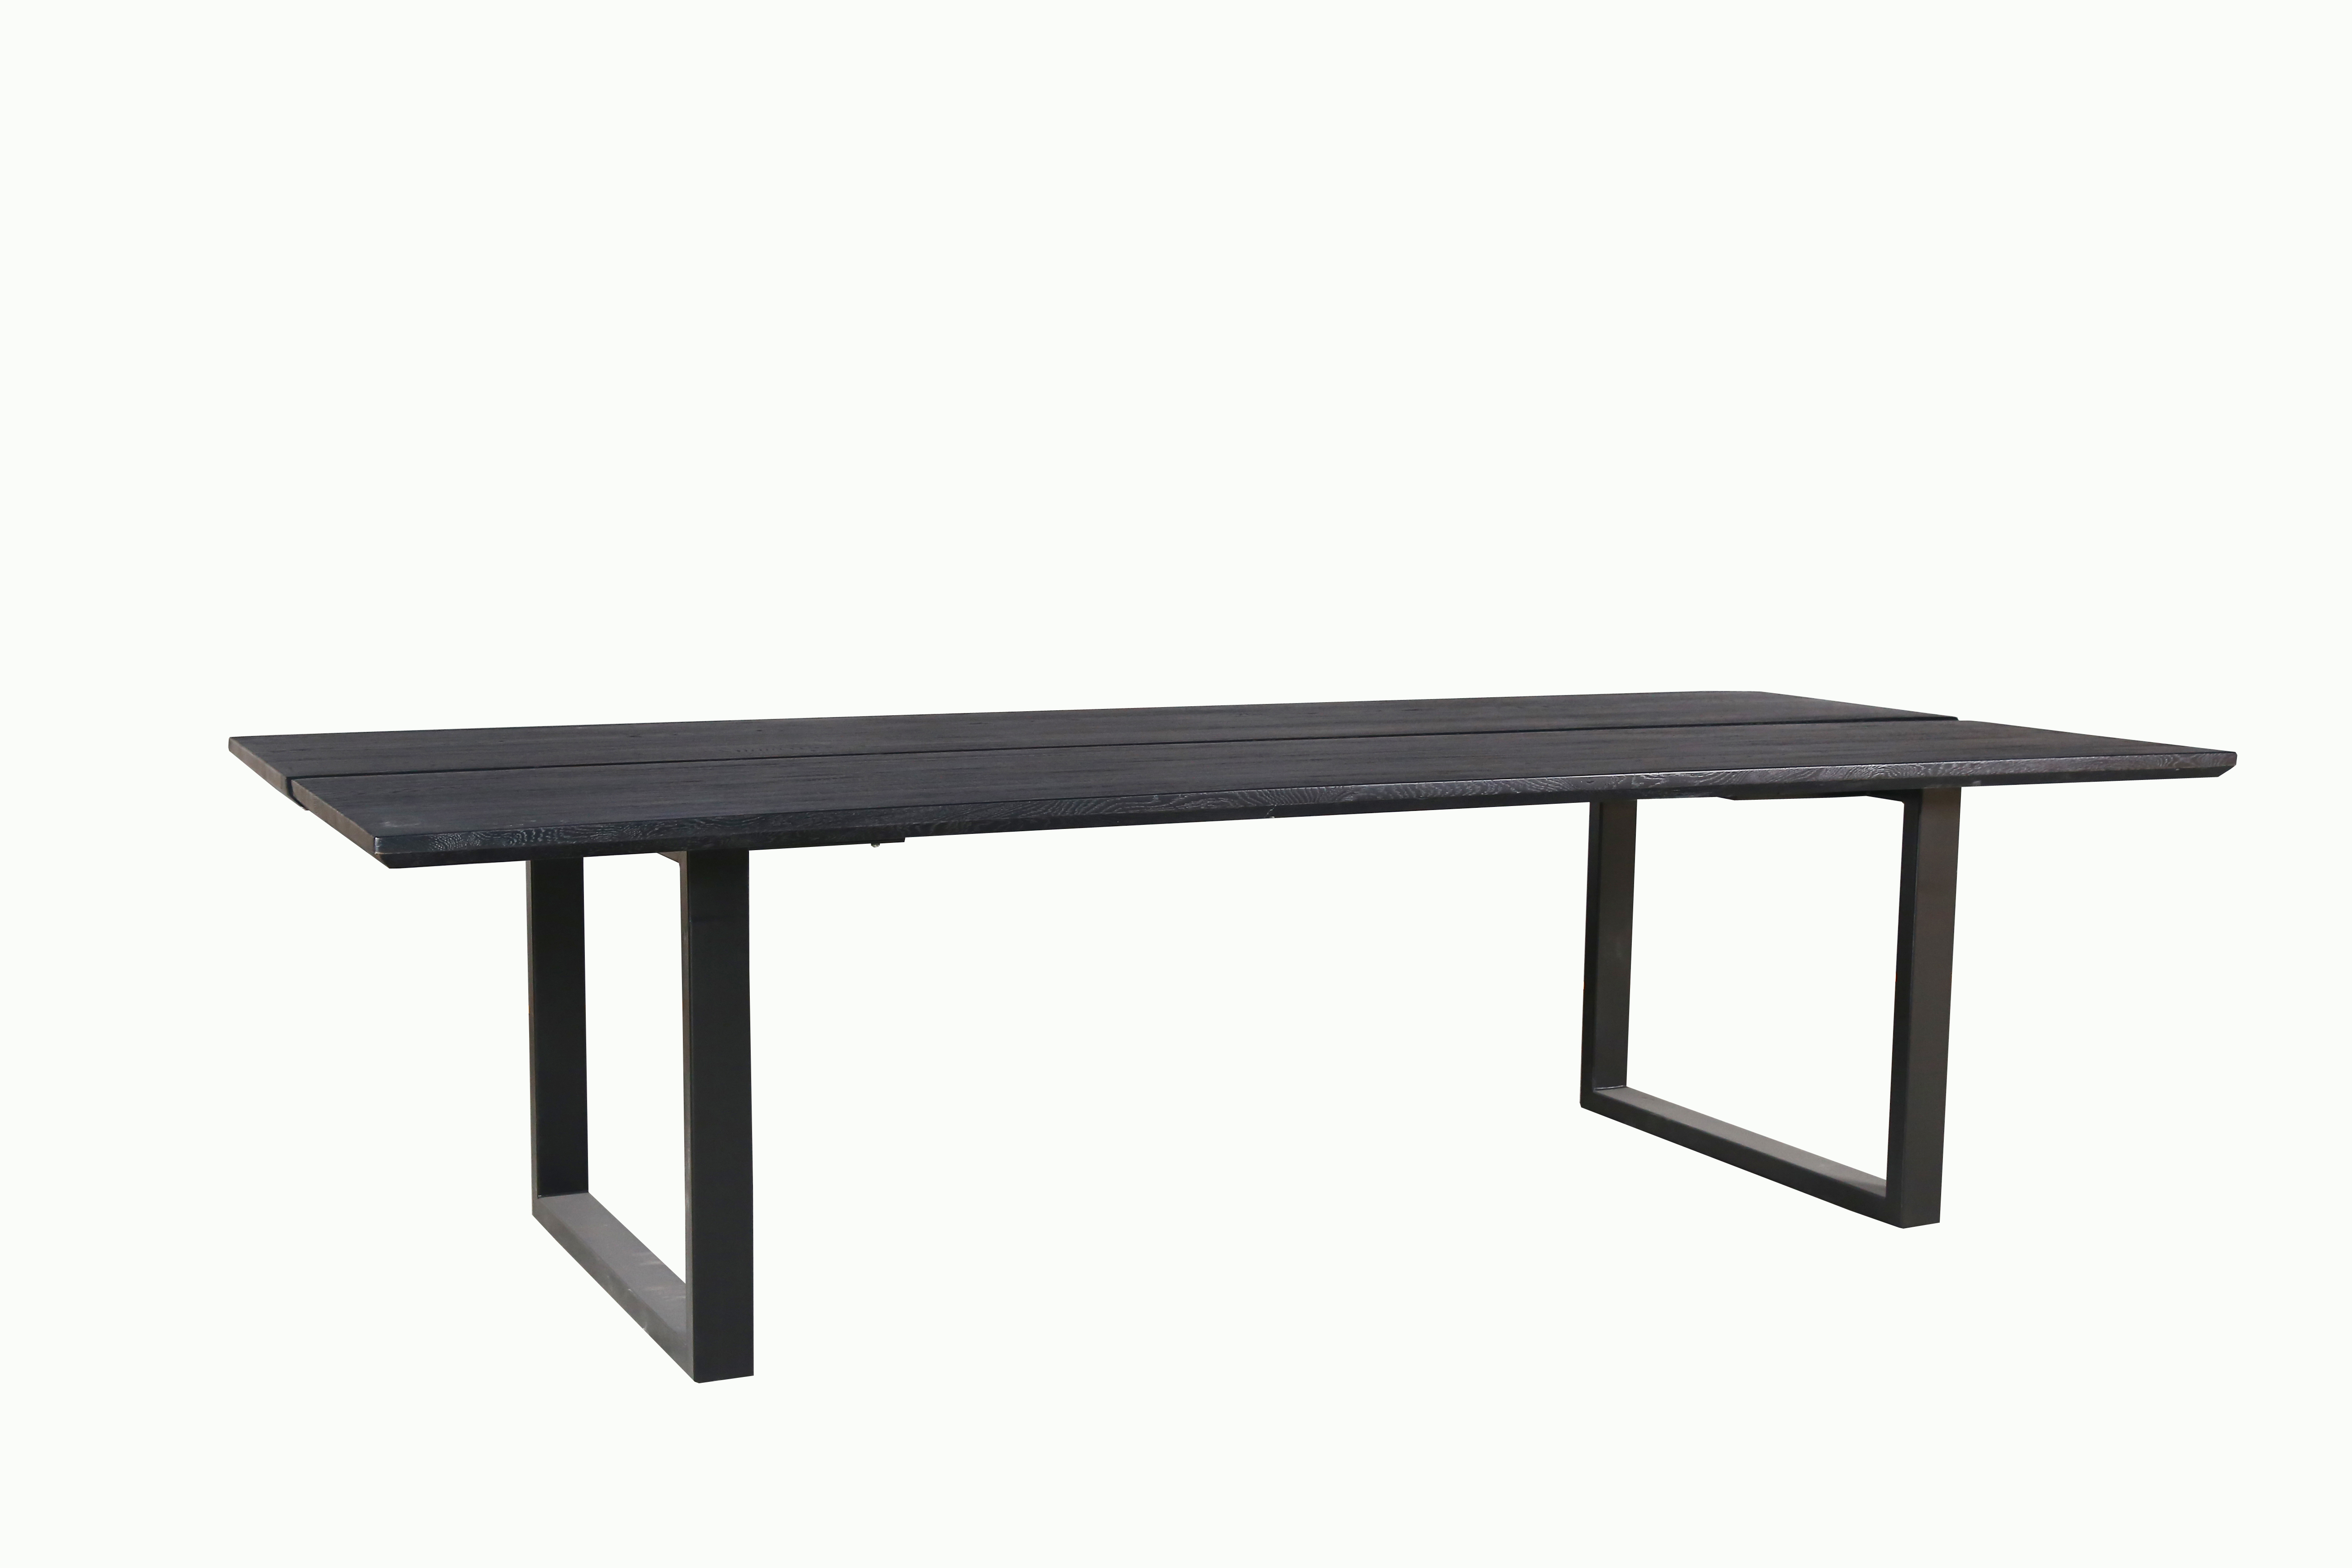 MD03-132-Wrought iron stainless steel dining table